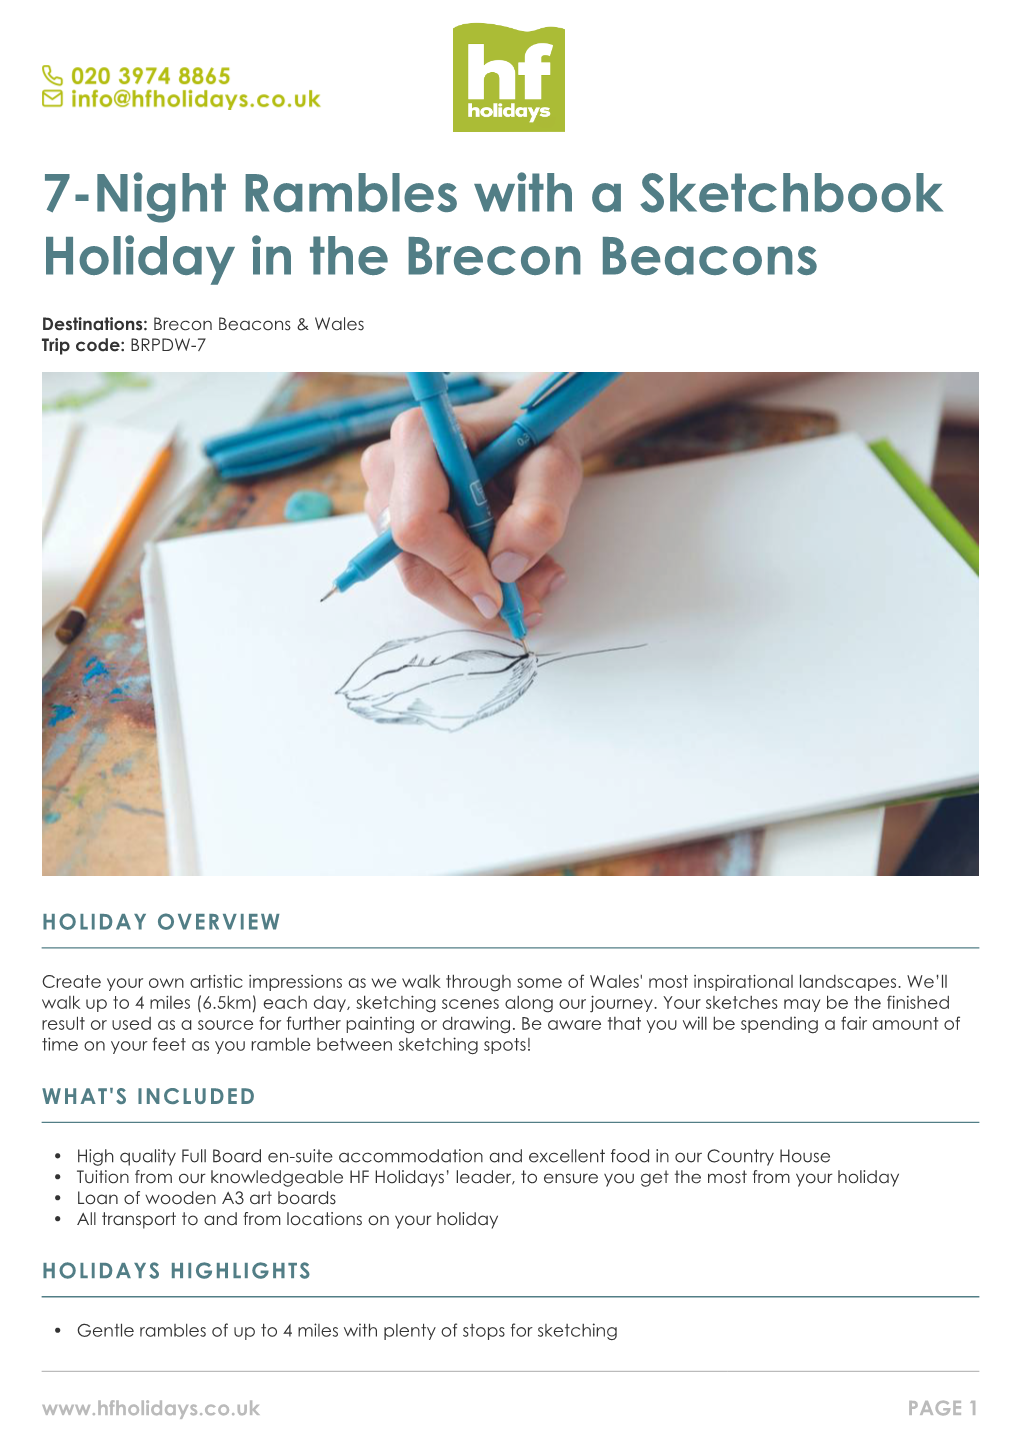 7-Night Rambles with a Sketchbook Holiday in the Brecon Beacons